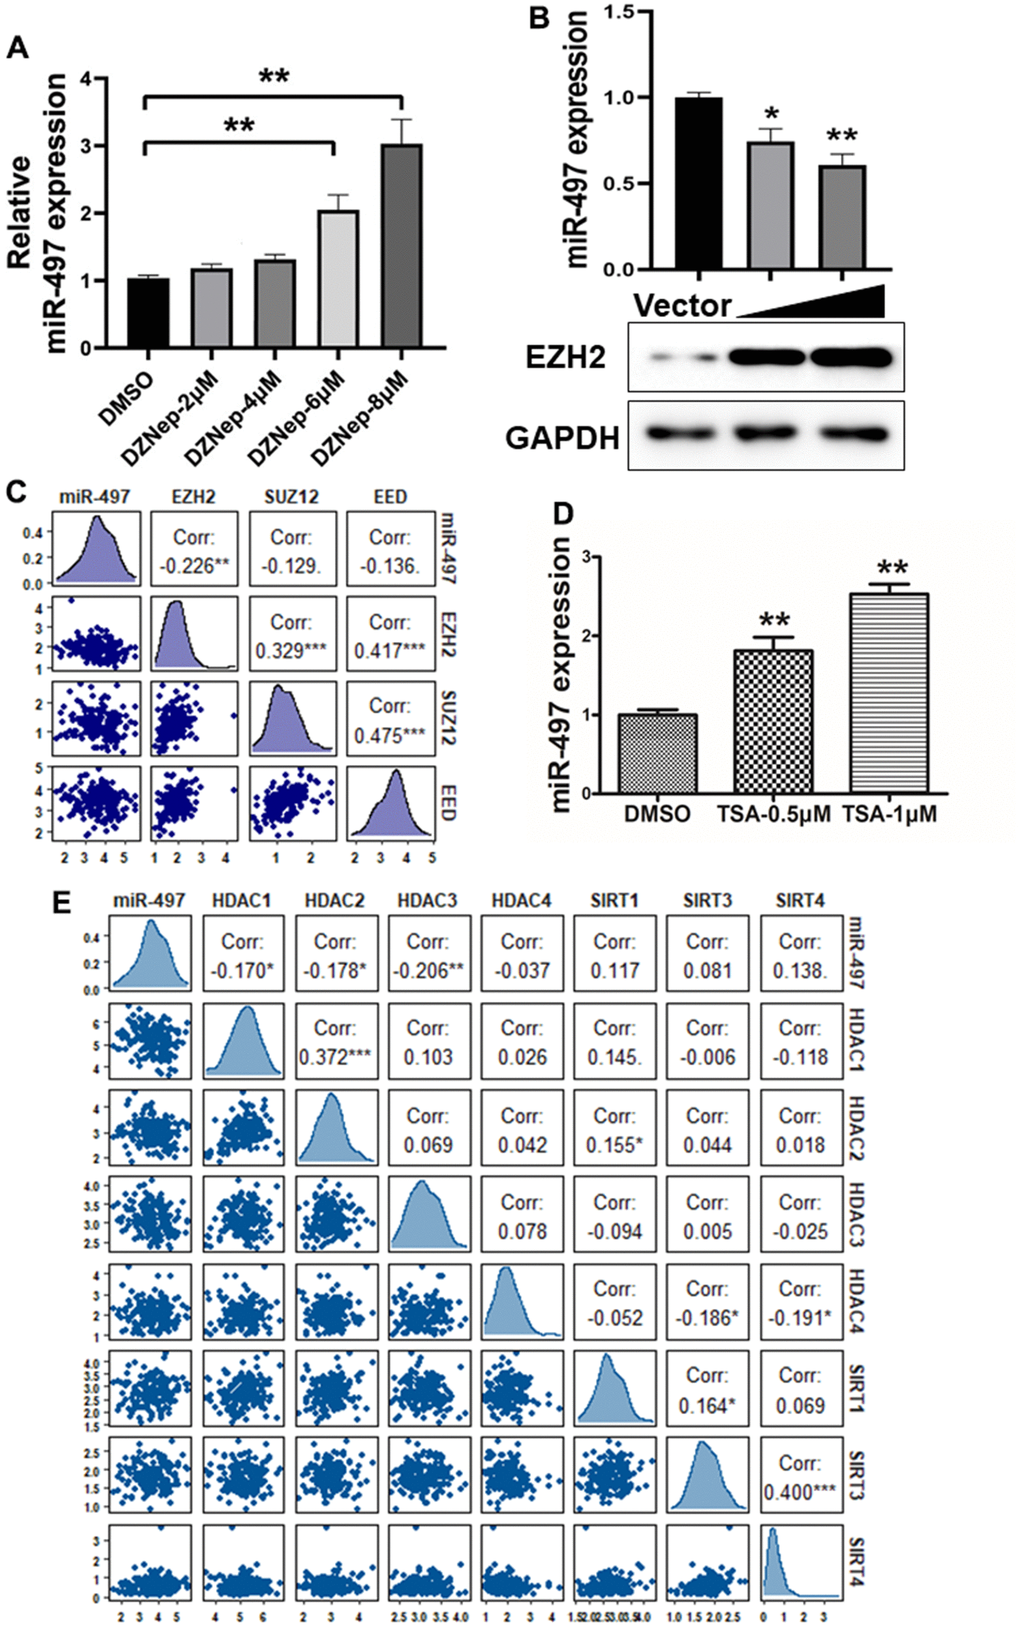 miR-497 suppression is mediated by EZH2 and histone acetylation. (A) Cells were treated with EZH2 inhibitor DZNep, and DZNep treatment greatly increased miR-497 expression levels in the cells in a dose-dependent manner. (B) Compared to vector control, overexpression of EZH2 significantly reduced miR-497 expression. (C) A negative correlation was showed between EZH2 and miR-497 levels in esophageal cancer tissues from the data obtained from TCGA database. (D) The histone deacetylases inhibitor TSA treatment in Eca109 induced miR-497 expression levels. (E) The esophageal cancer data from TCGA was used to analyze correlation between expression levels of miR-497 and histone deacetylases: HDAC1, HDAC2 and HDAC3, which is inversely correlated. Spearman’s correlation analysis was carried out in (C, E). All data were representative of 3 independent experiments. * indicated significant difference at p